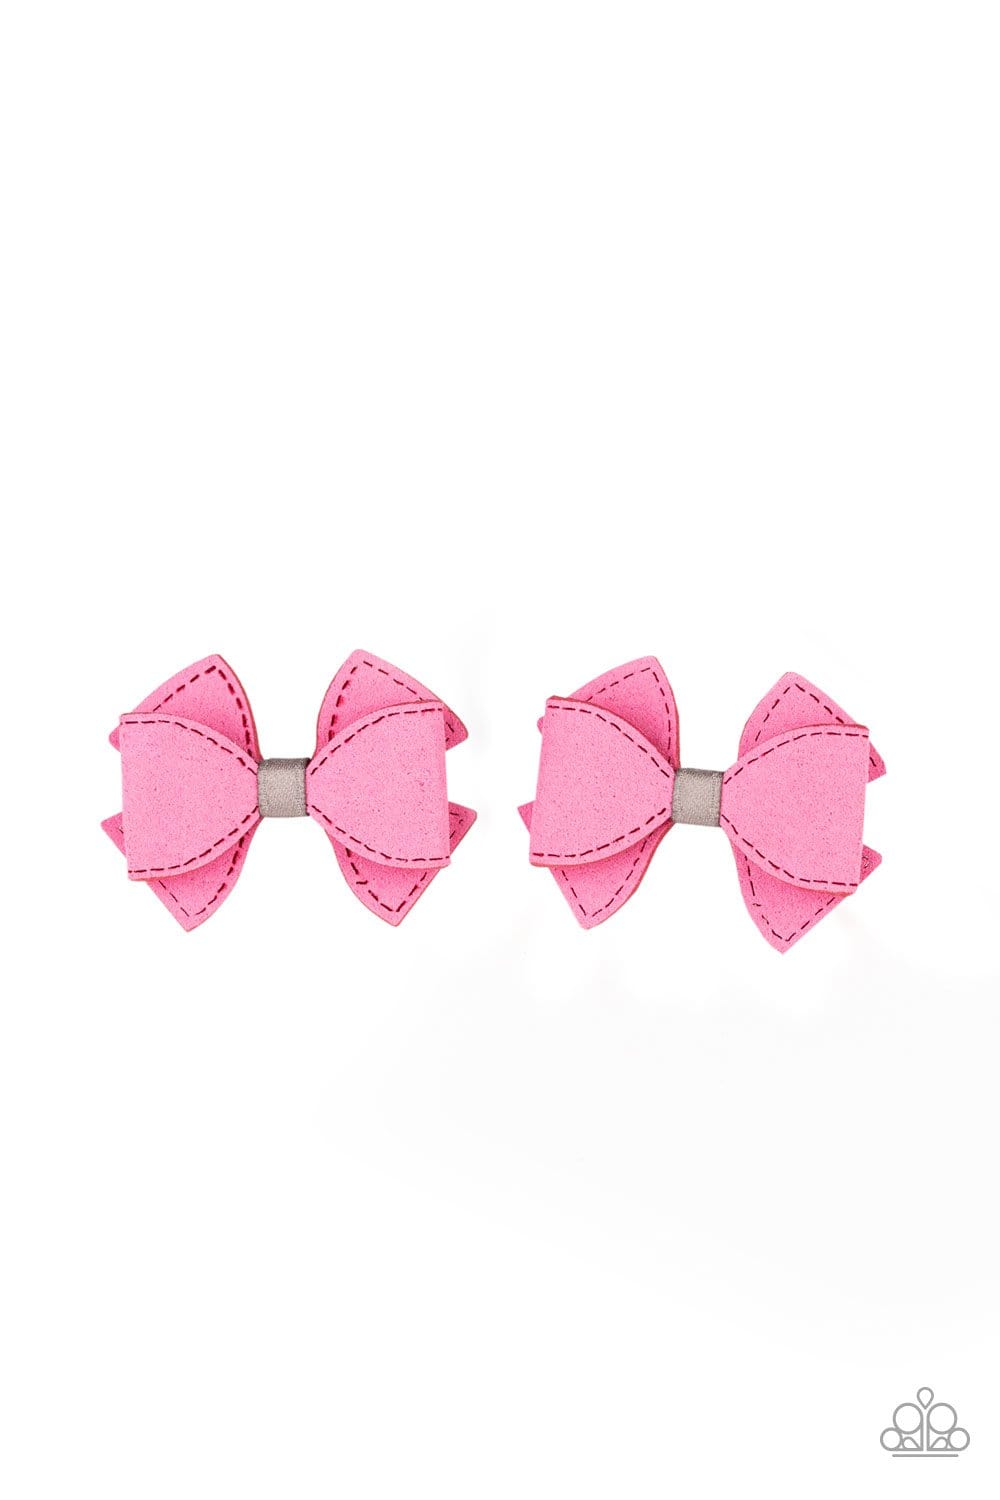 pink hair clips